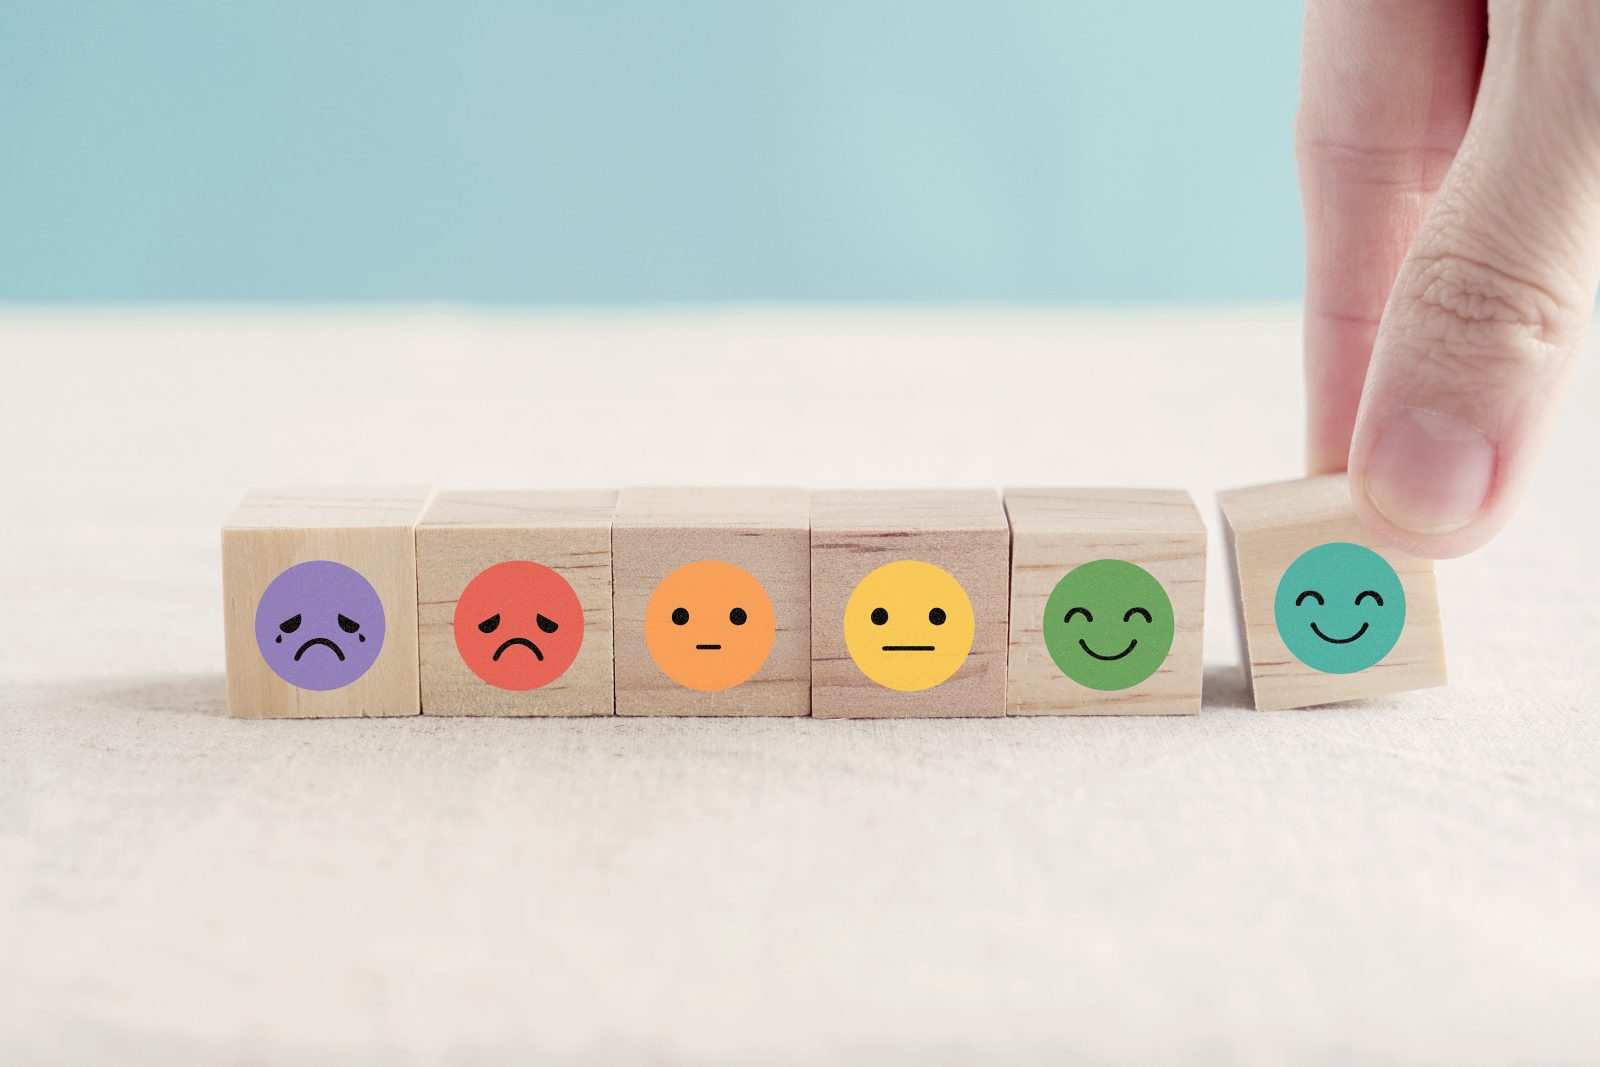 Closeup of small wooden blocks, each with a cartoon face expressing a different emotion, from very sad to neutral to very happy. A hand is reaching down, placing the very happy block on the table.